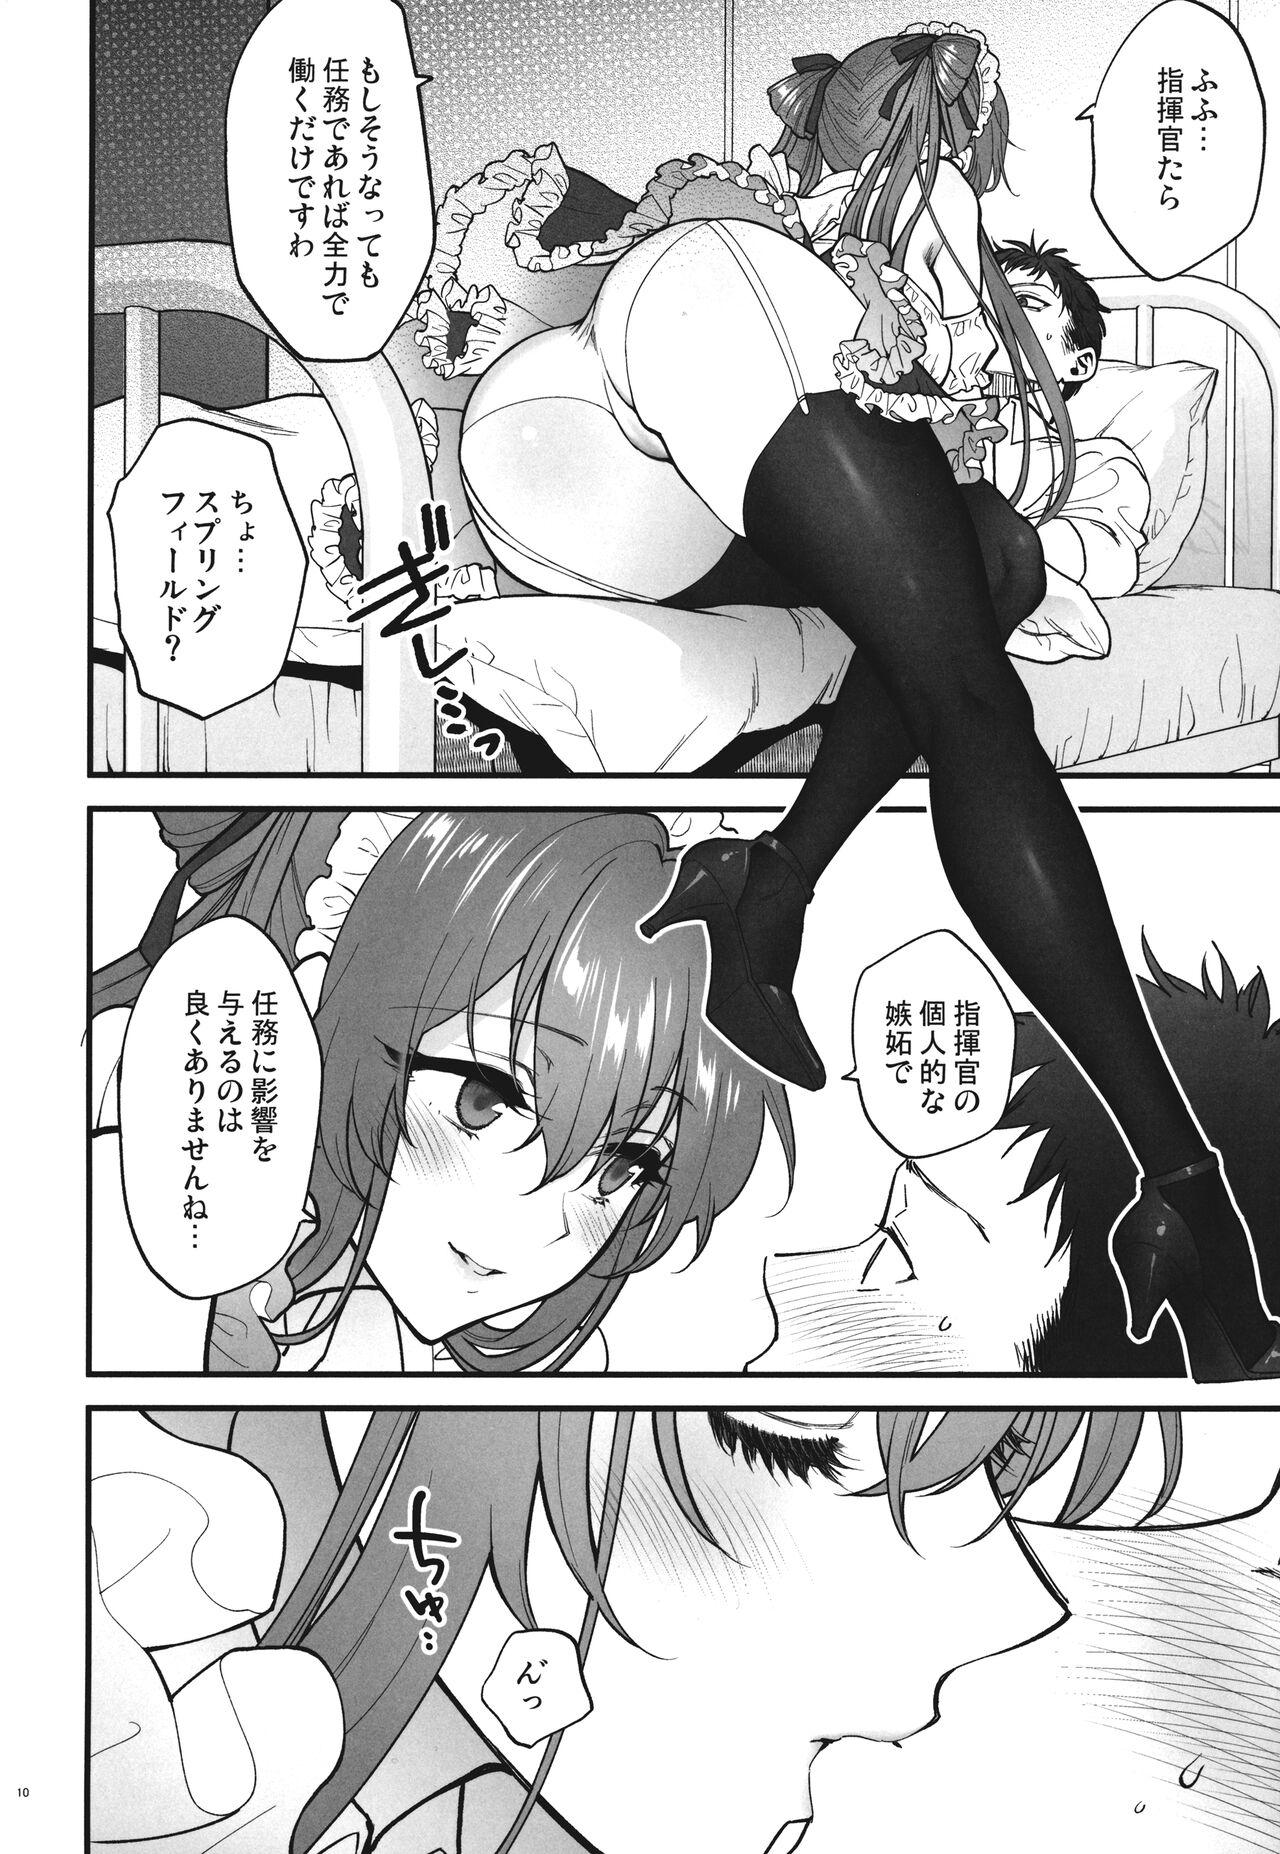 Lady Make me Yours - Girls frontline Hard Cock - Page 9